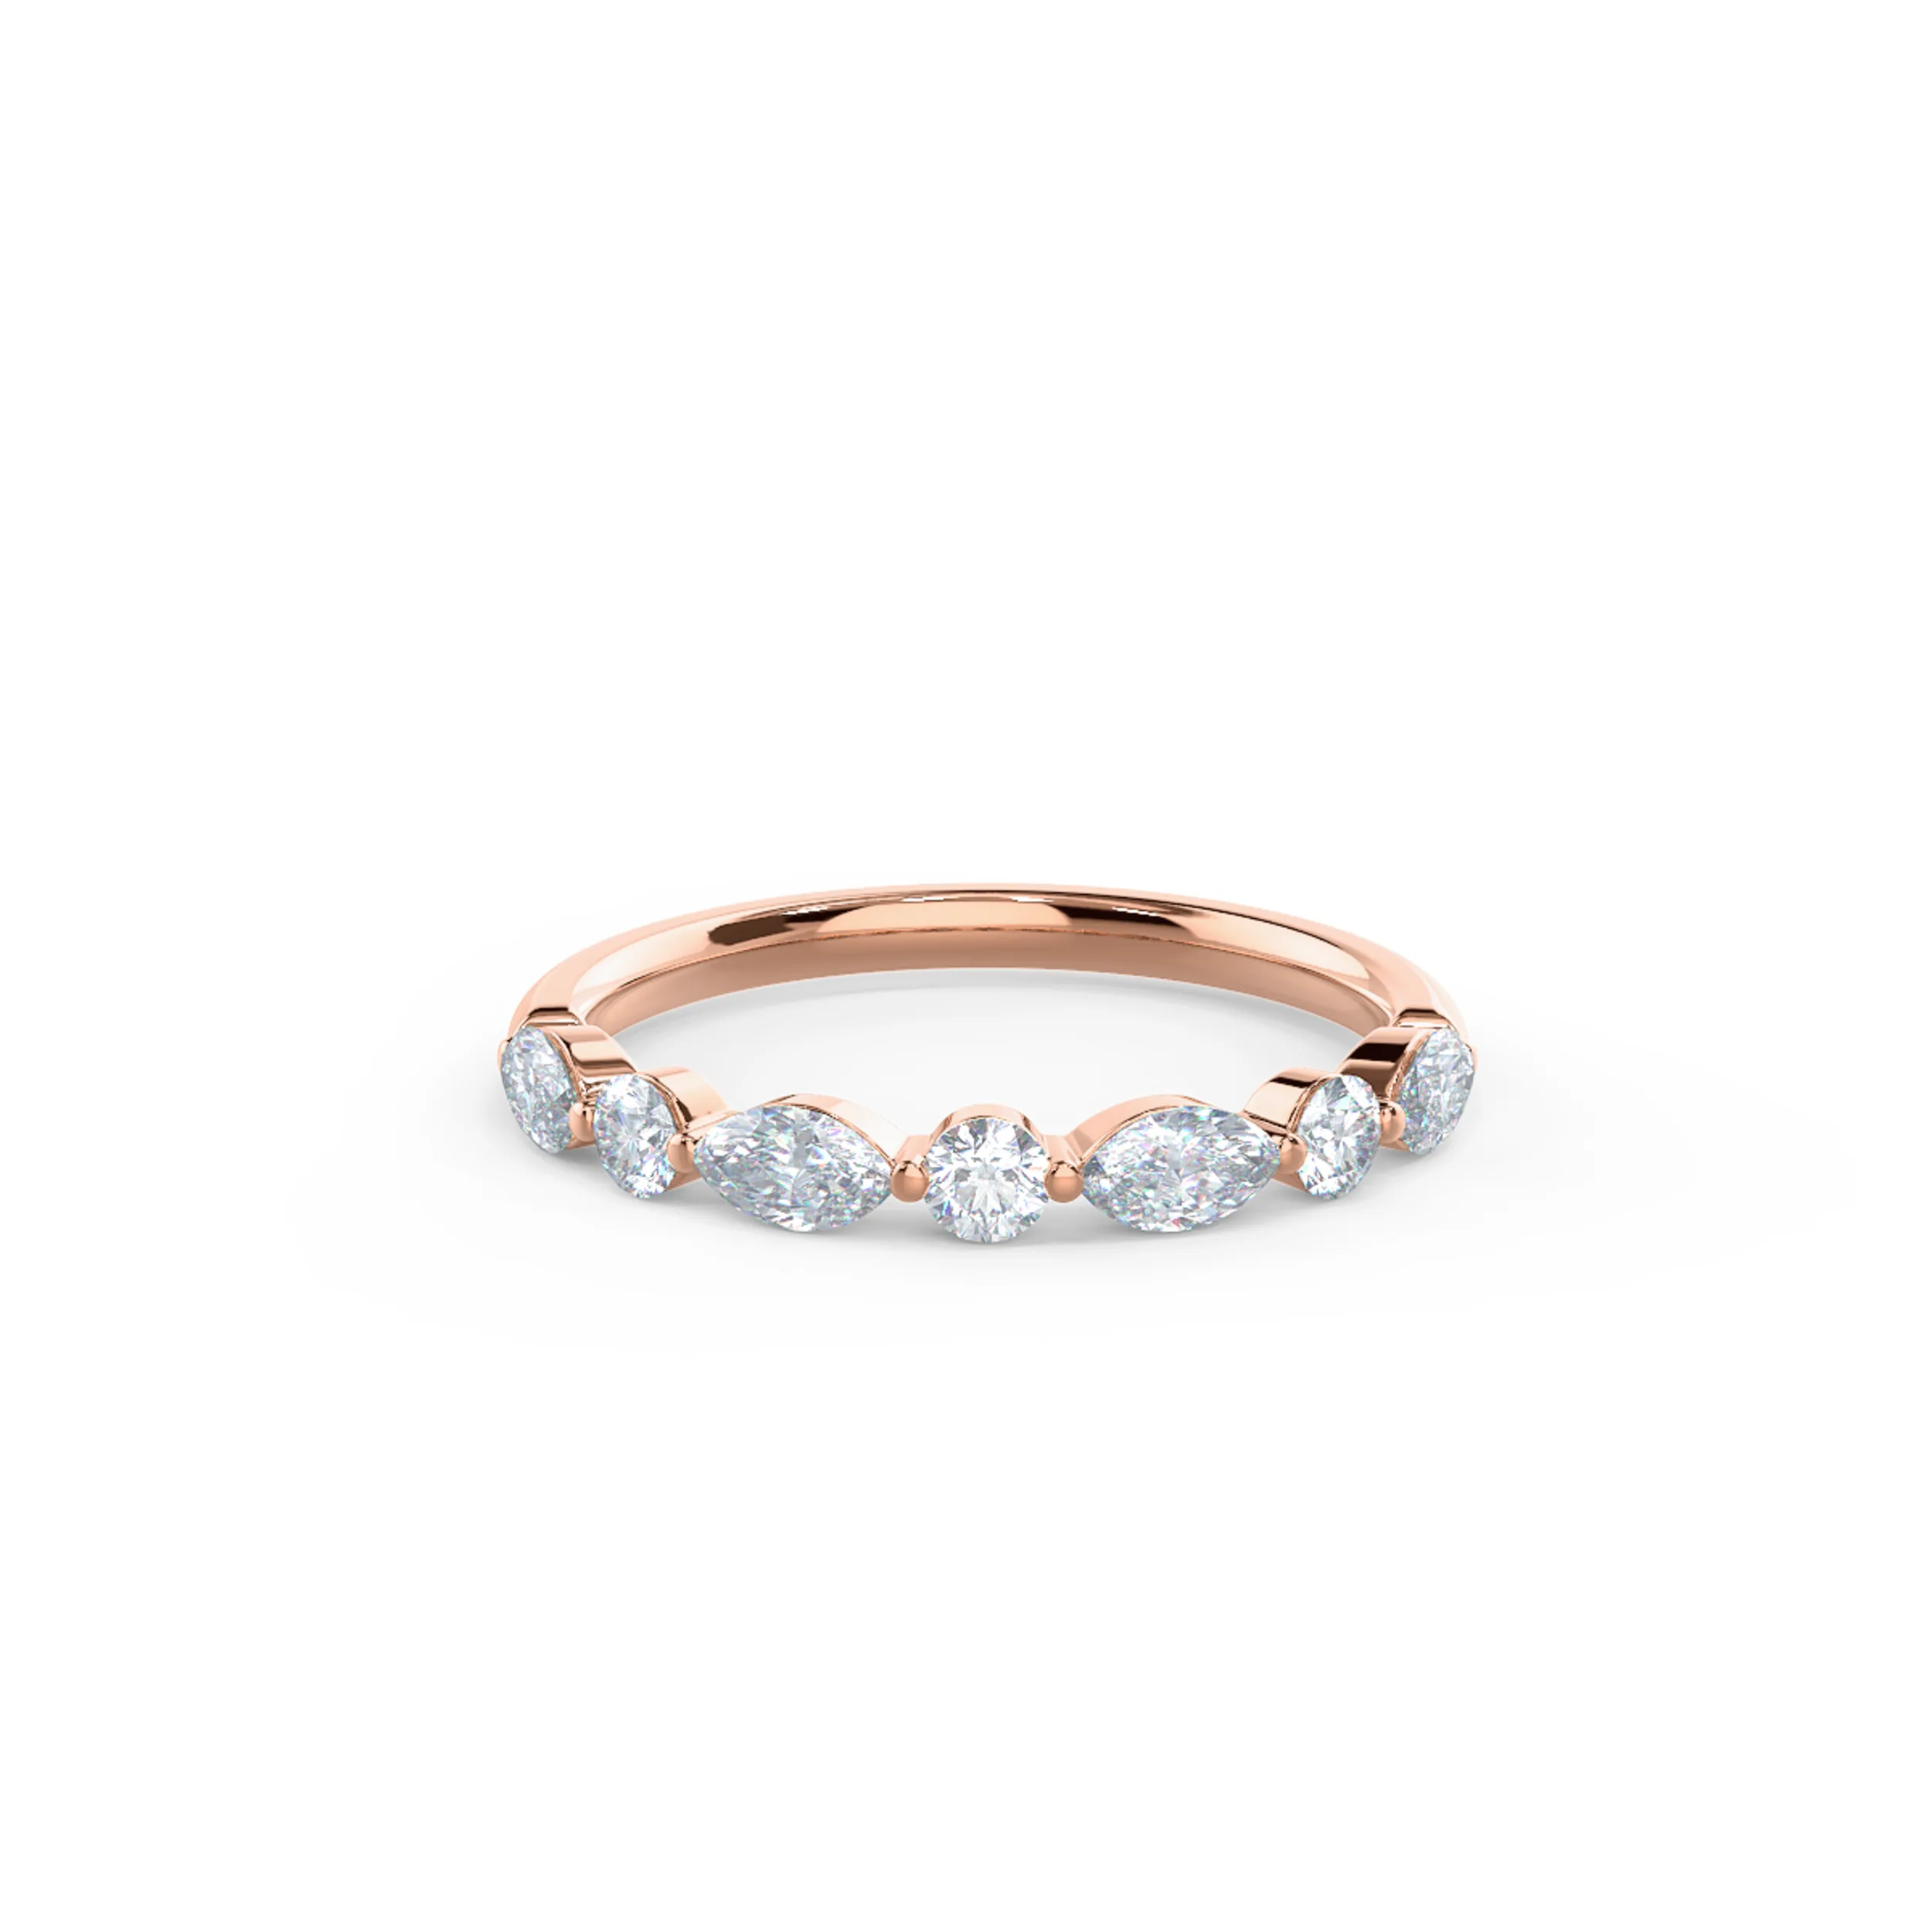 Hand Selected 0.55 Carat Diamonds Marquise and Round East-West Seven Stone in 14k Rose Gold (Main View)